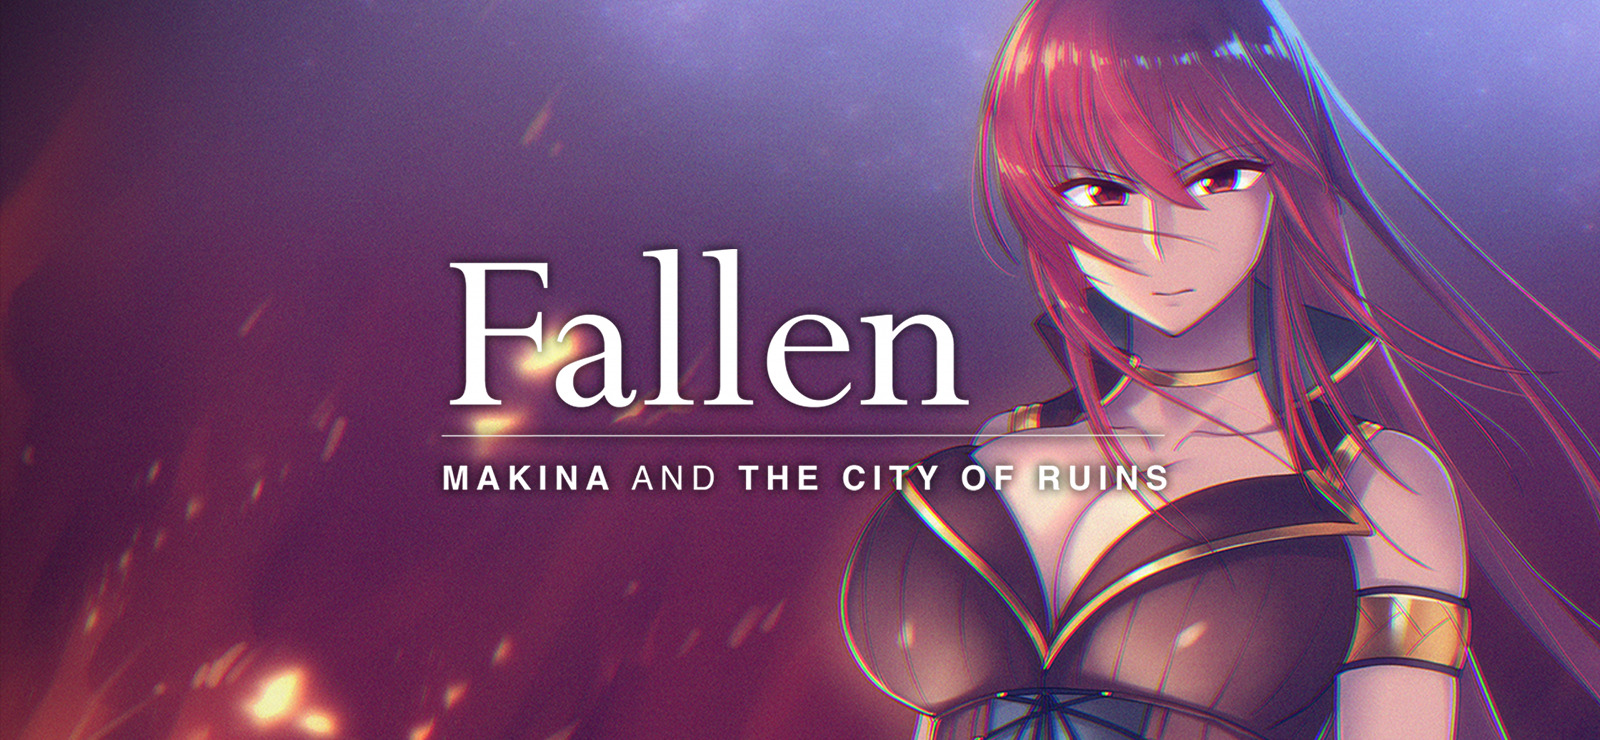 Fallen Makina and the City